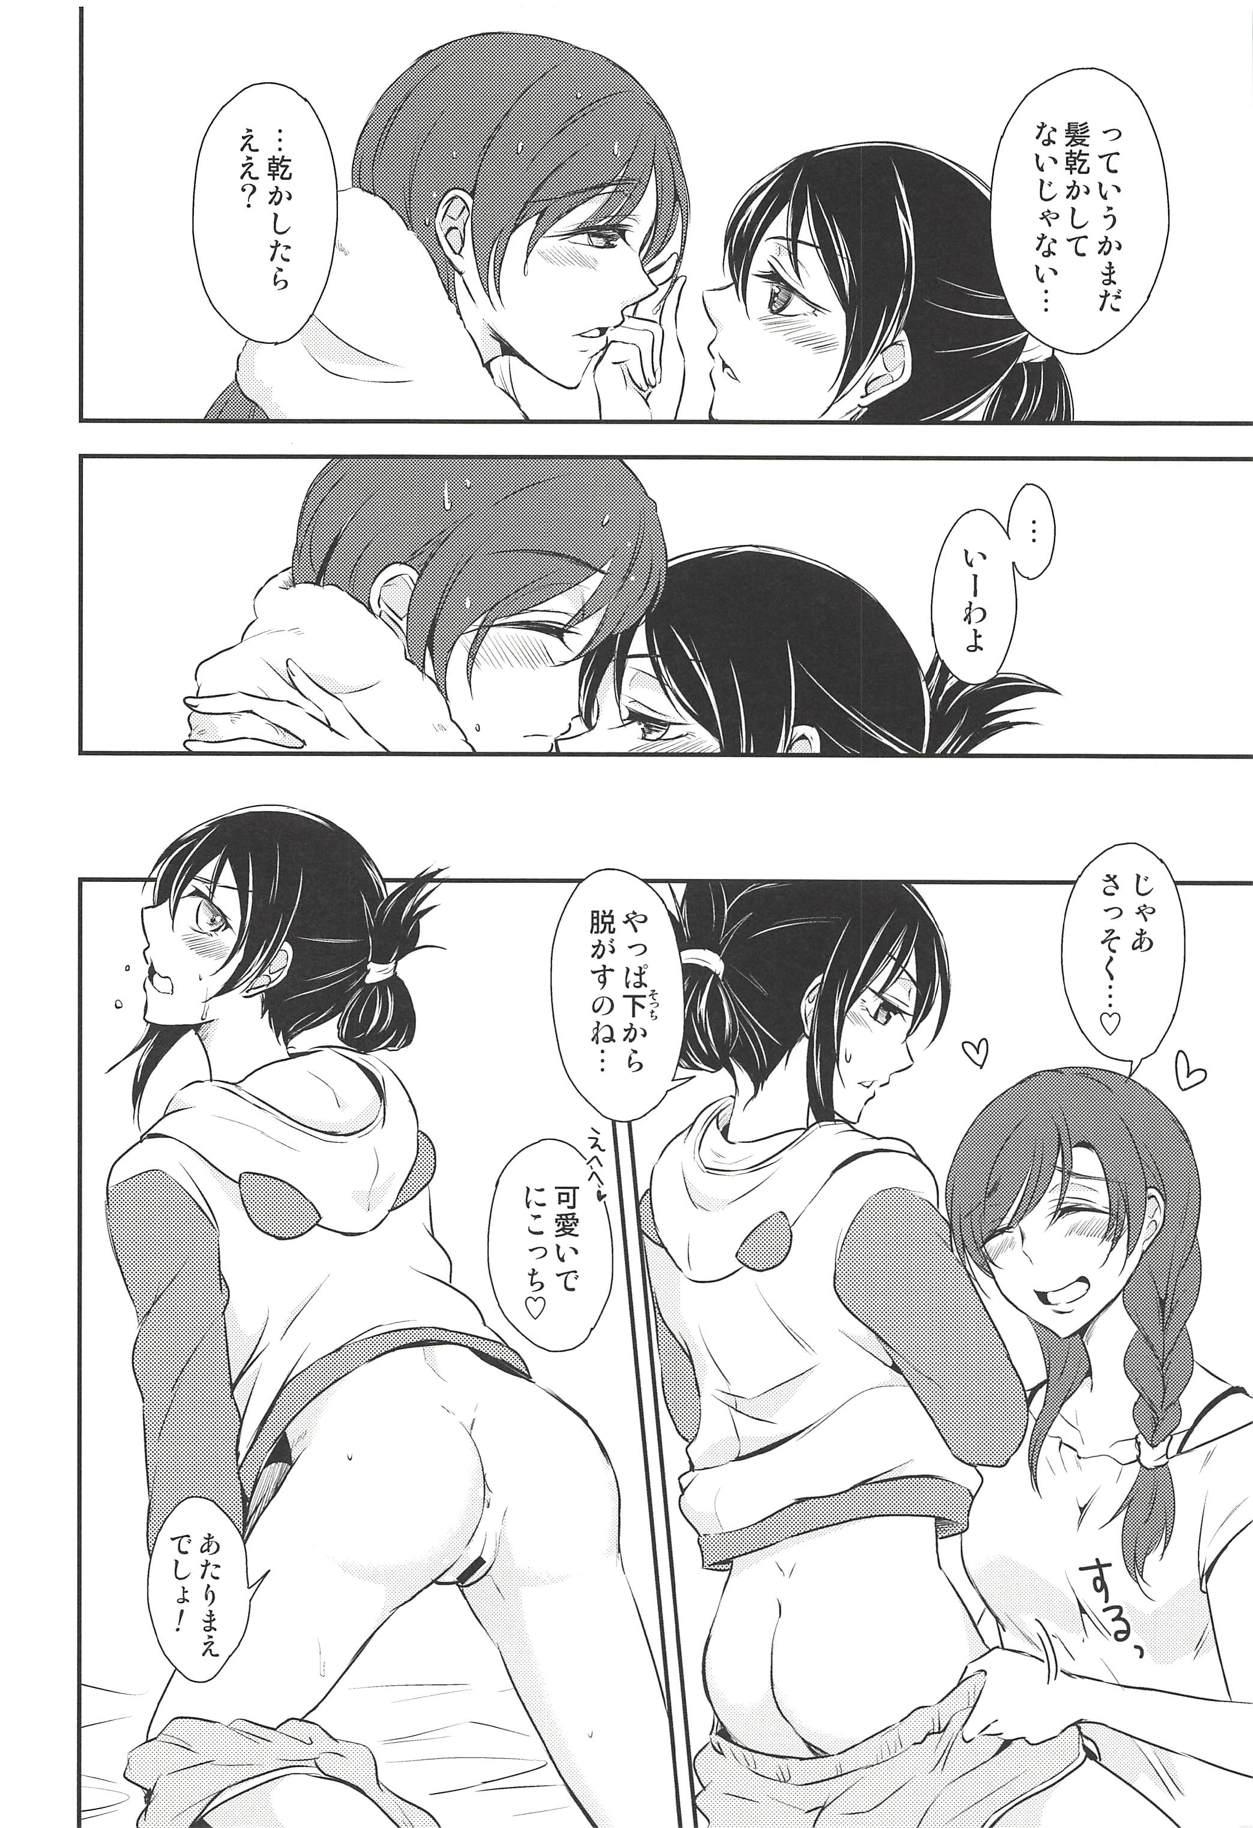 Nalgas Eat Up! - Love live Sesso - Page 5